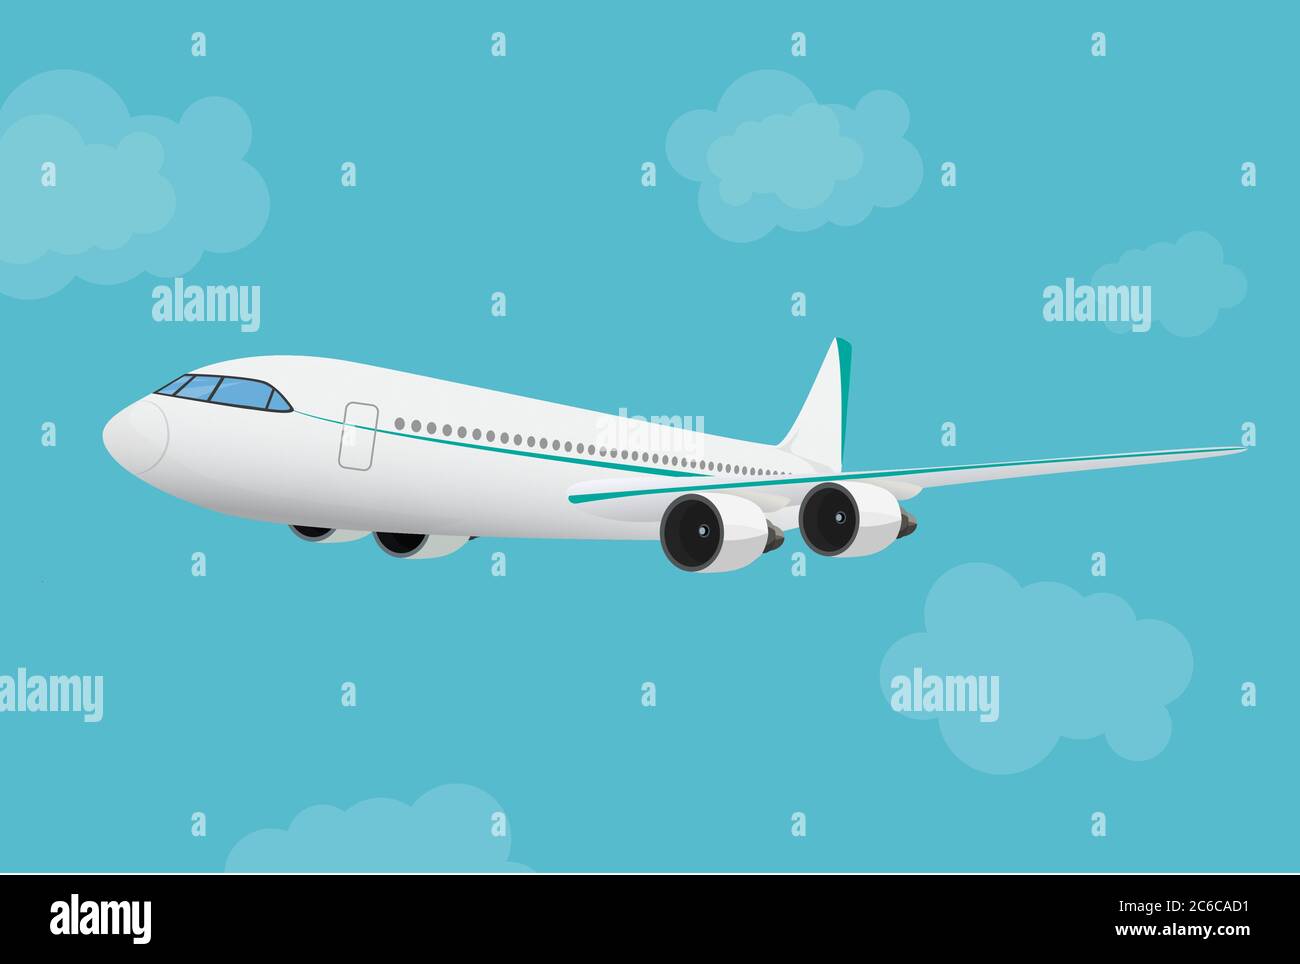 Airplane flying in the blue sky background. Stock Vector